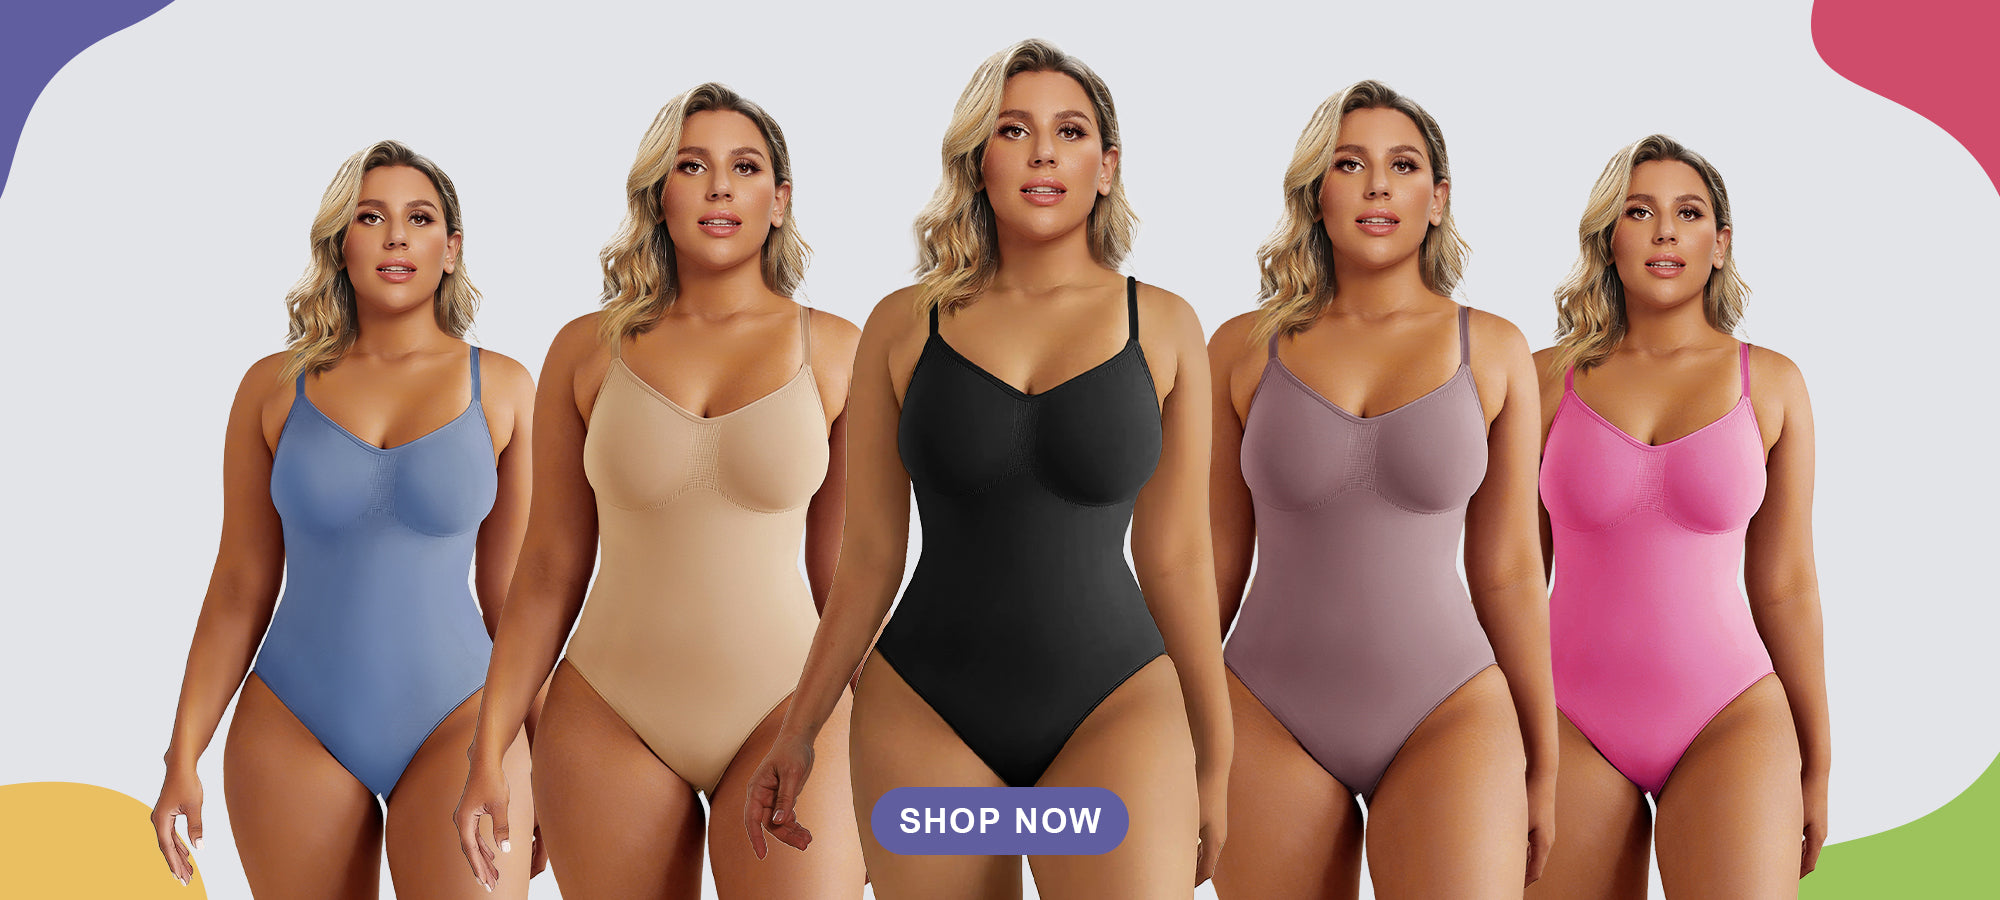 Ackermans - Get in shape with all shapewear, sizes XS – XL, now only 99.95.  Only until Thursday 12 September, so get in-store.